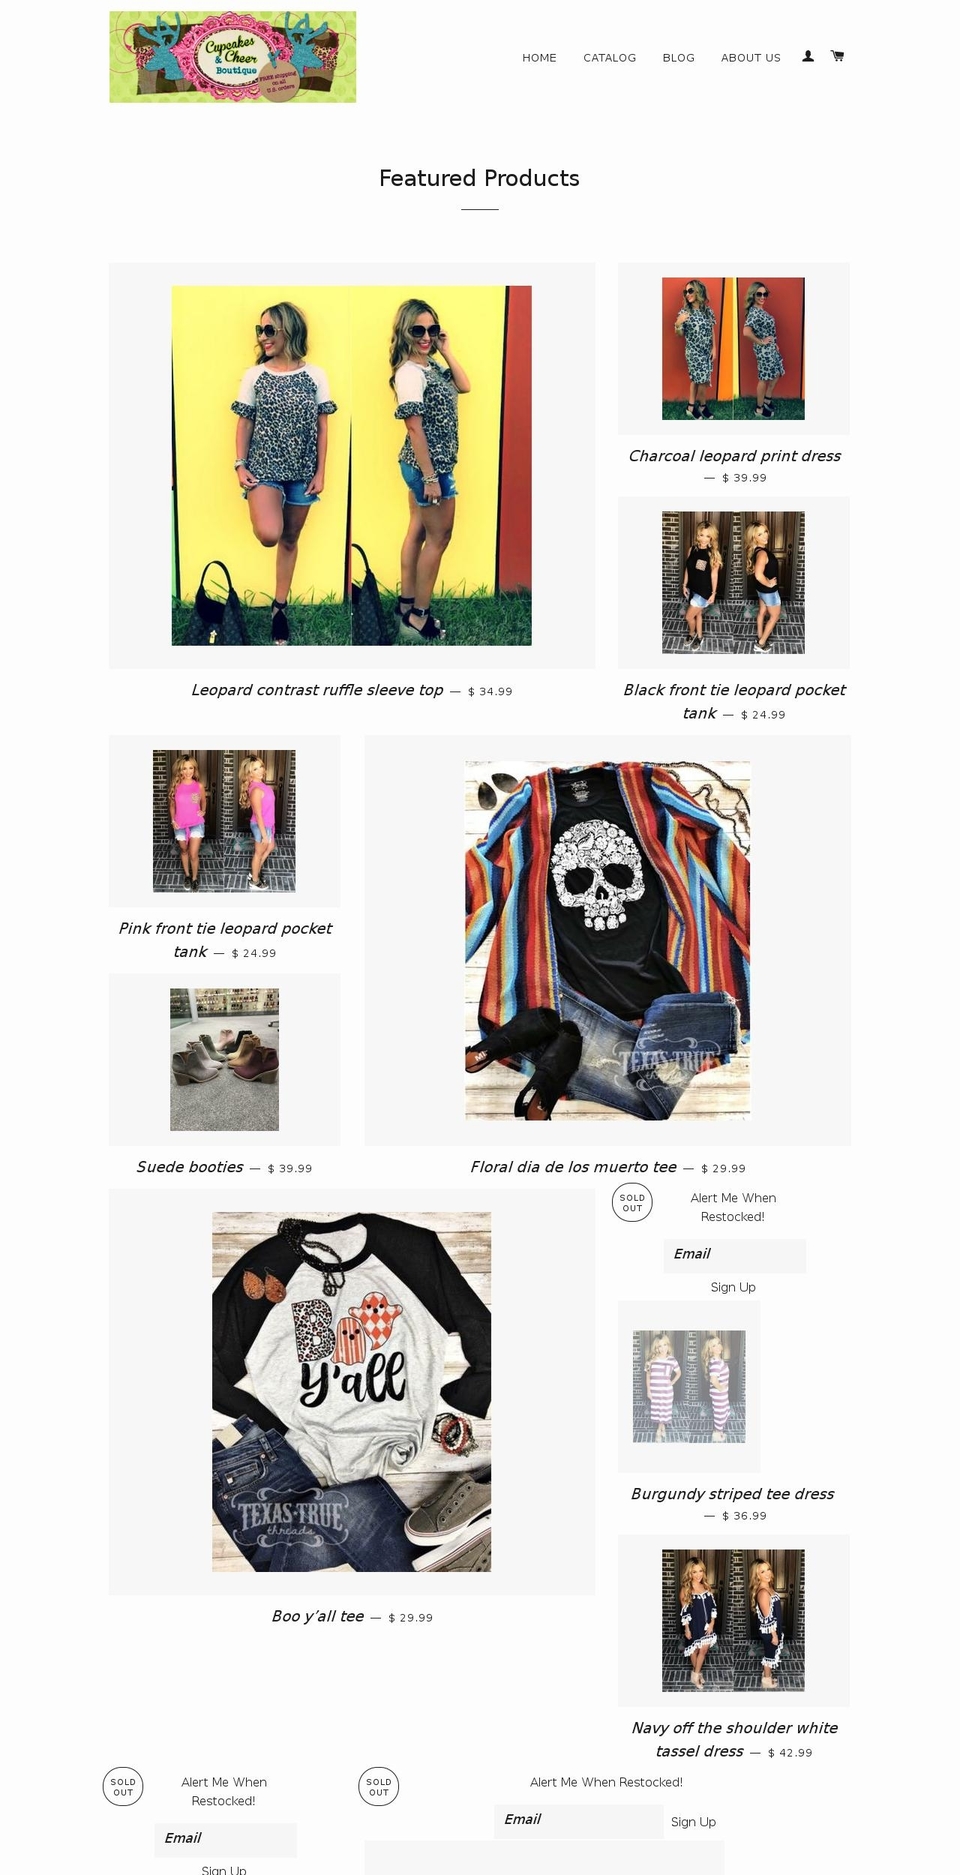 Wholesale Shopify theme site example cupcakesandcheer.com